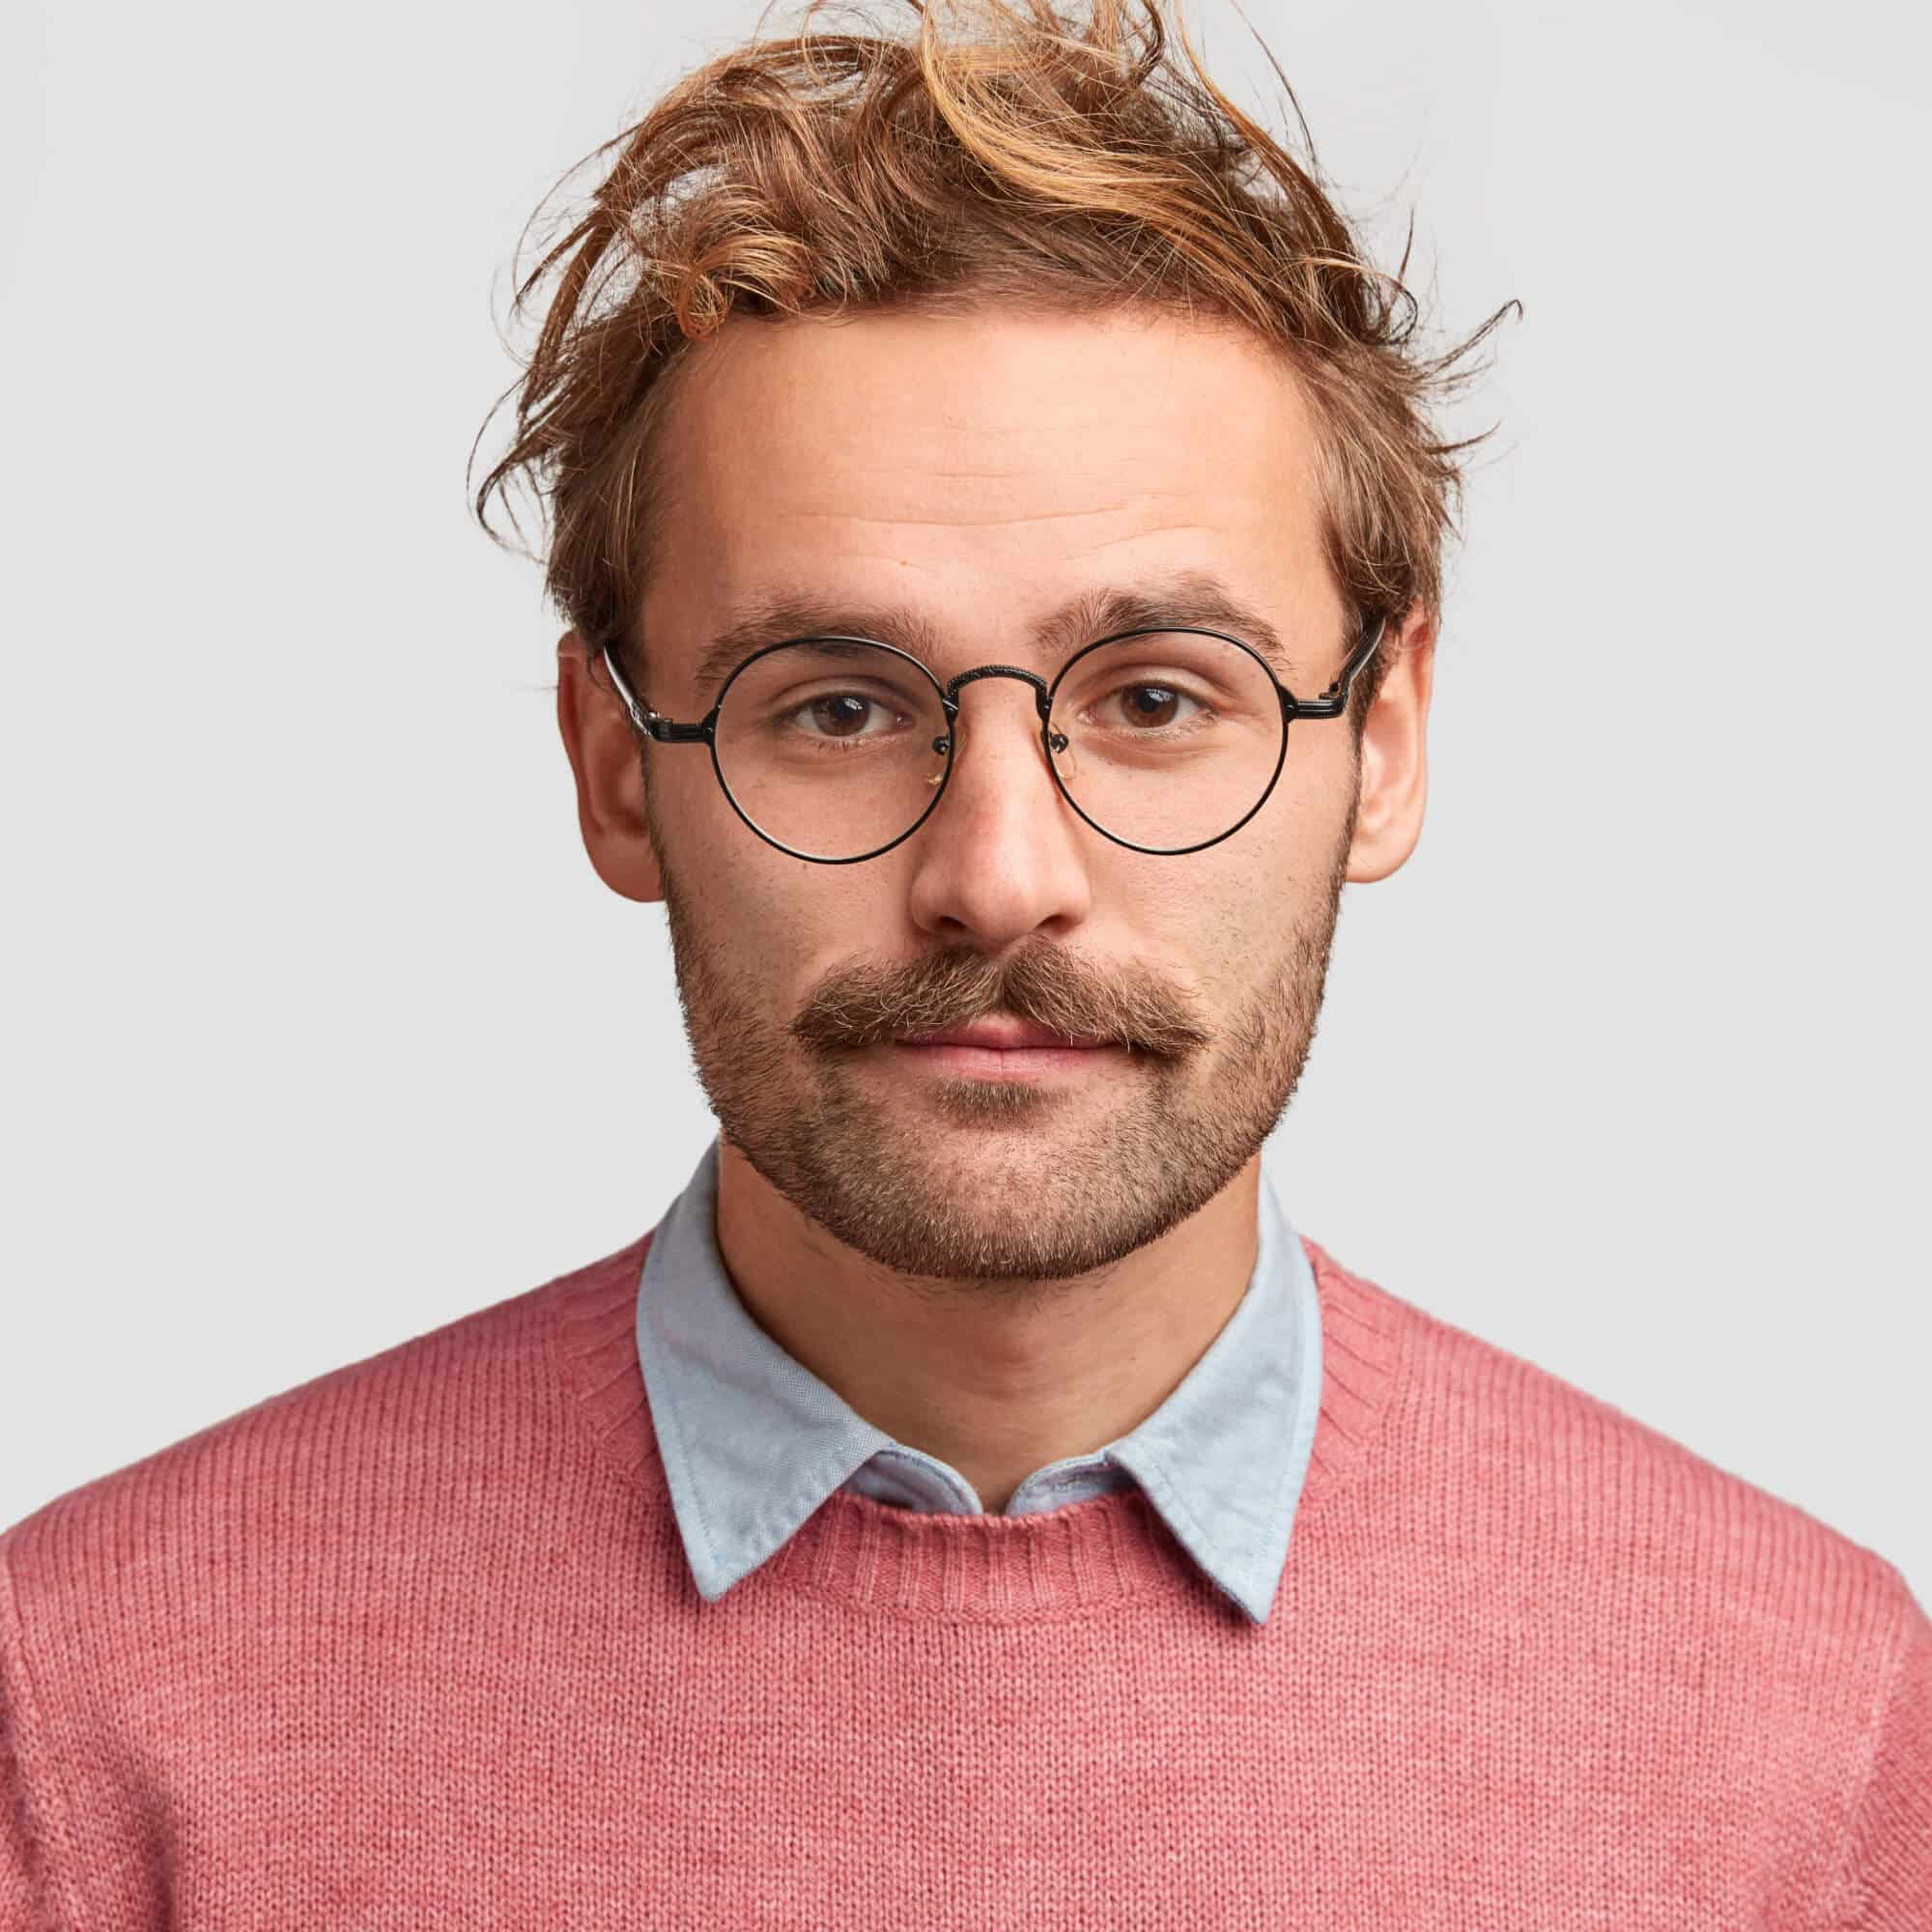 serious-male-teacher-with-confident-clever-look-h-2022-02-03-20-47-29-utc-1.jpg